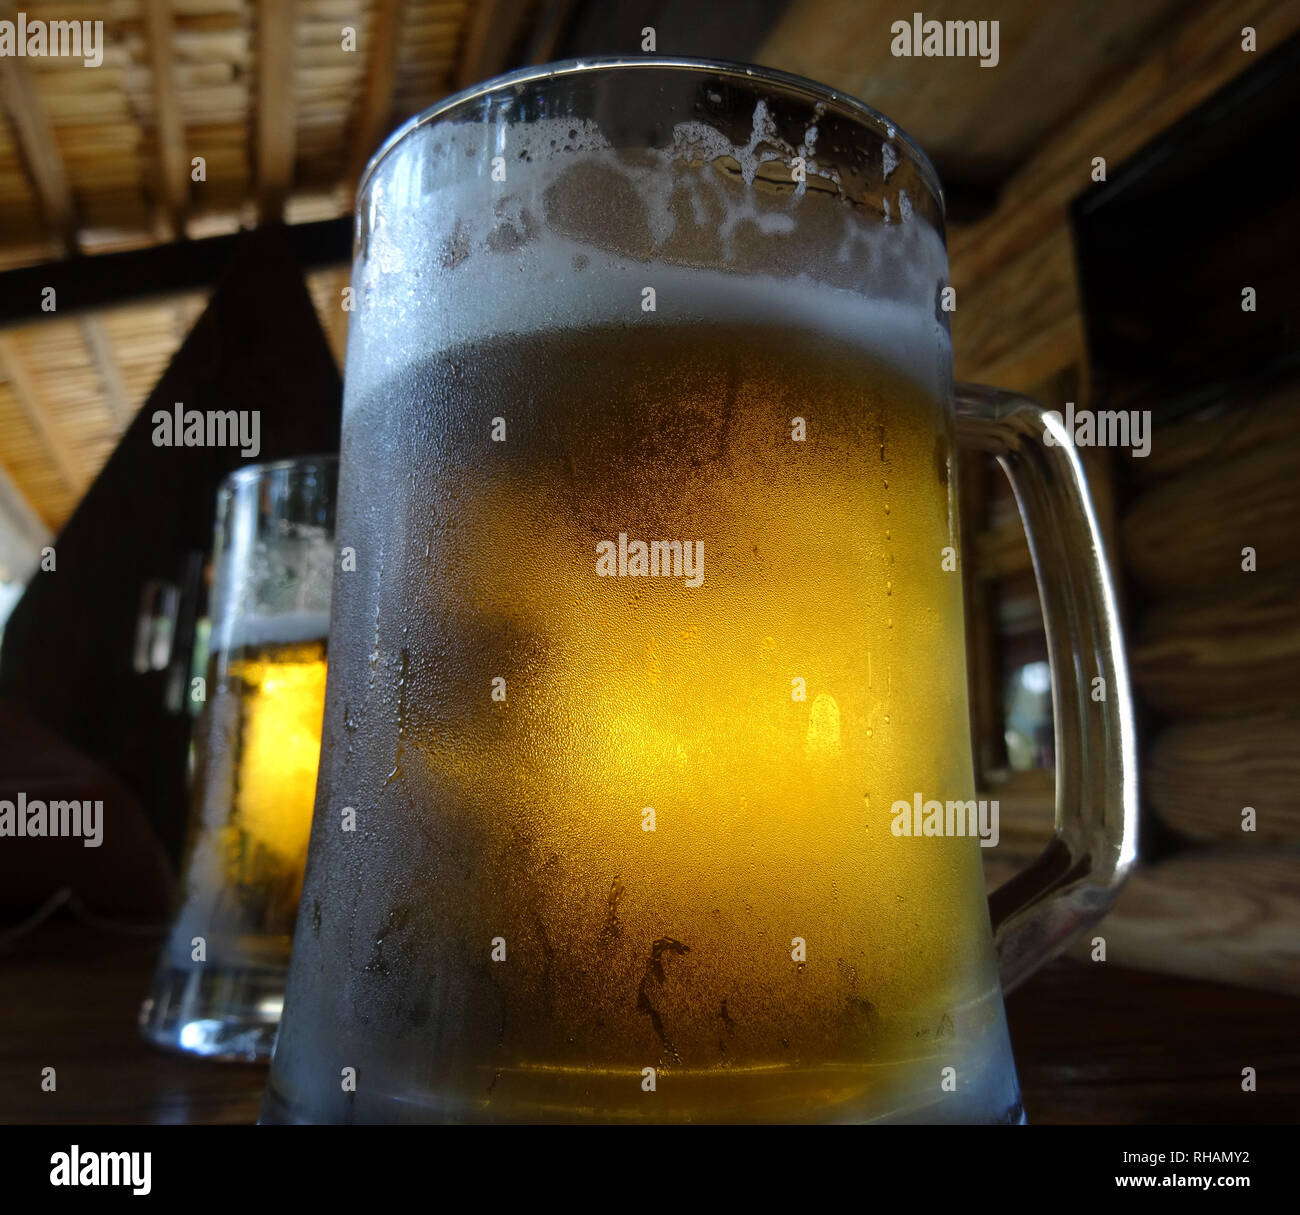 Two pints of craft beer with froth on the glass on the wood table Stock Photo